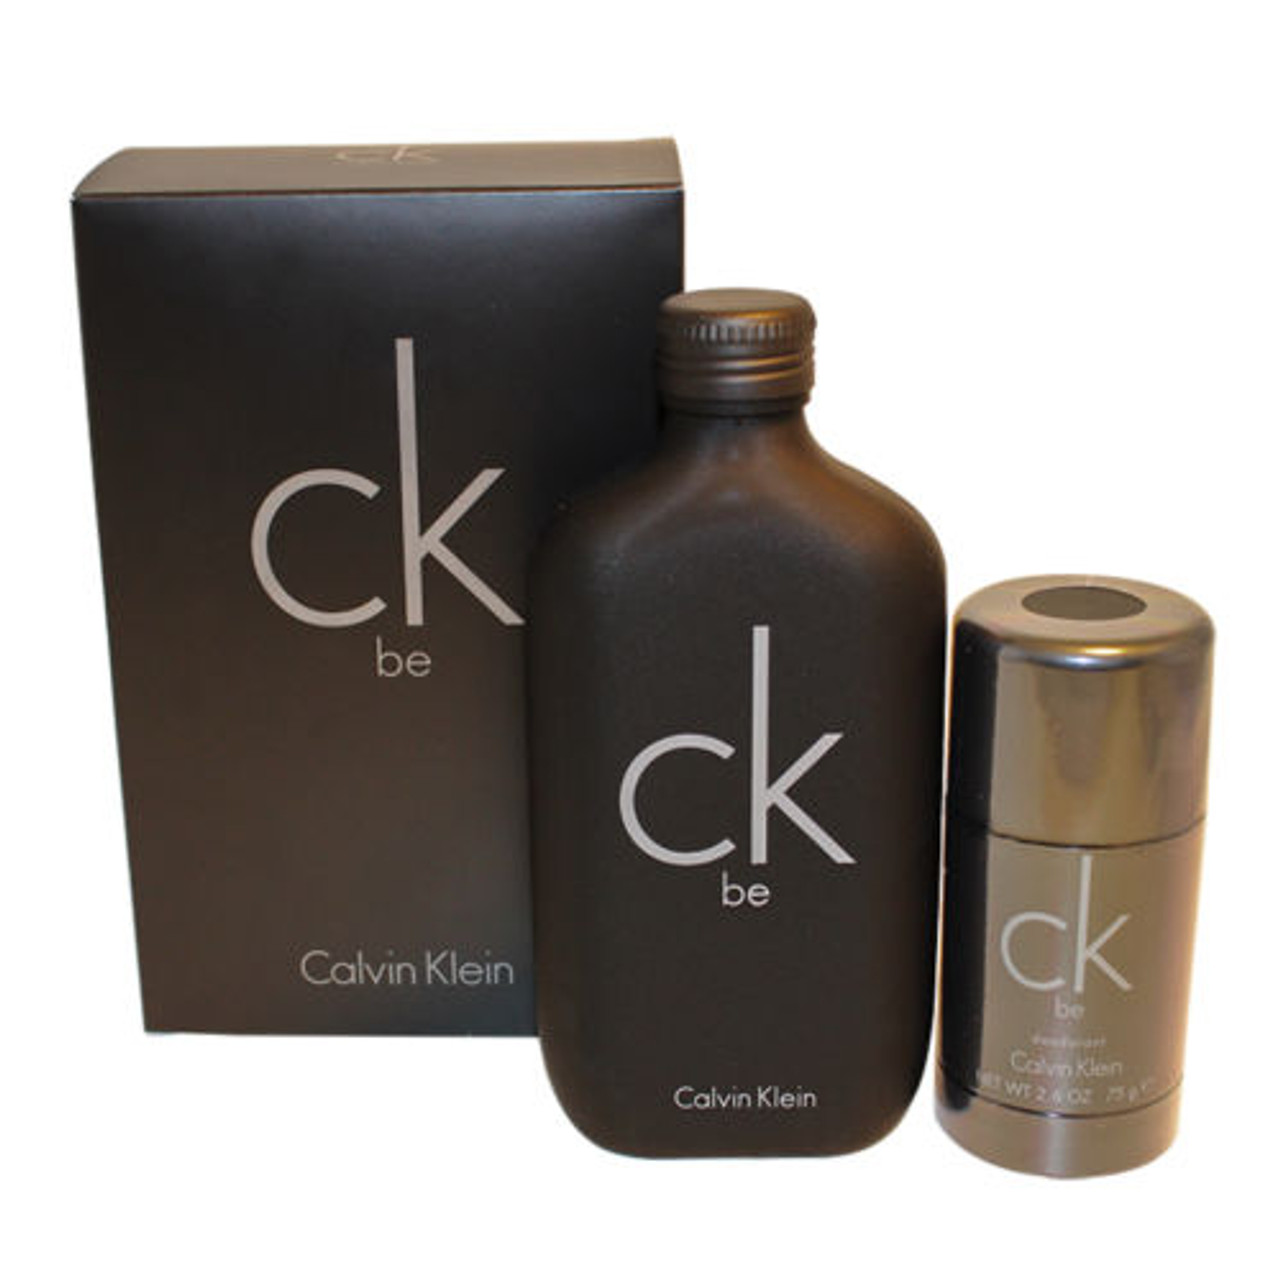 CK Be by Calvin Klein 2pc Gift Set EDT 6.7 oz + Deo Stick 2.6 oz for Unisex